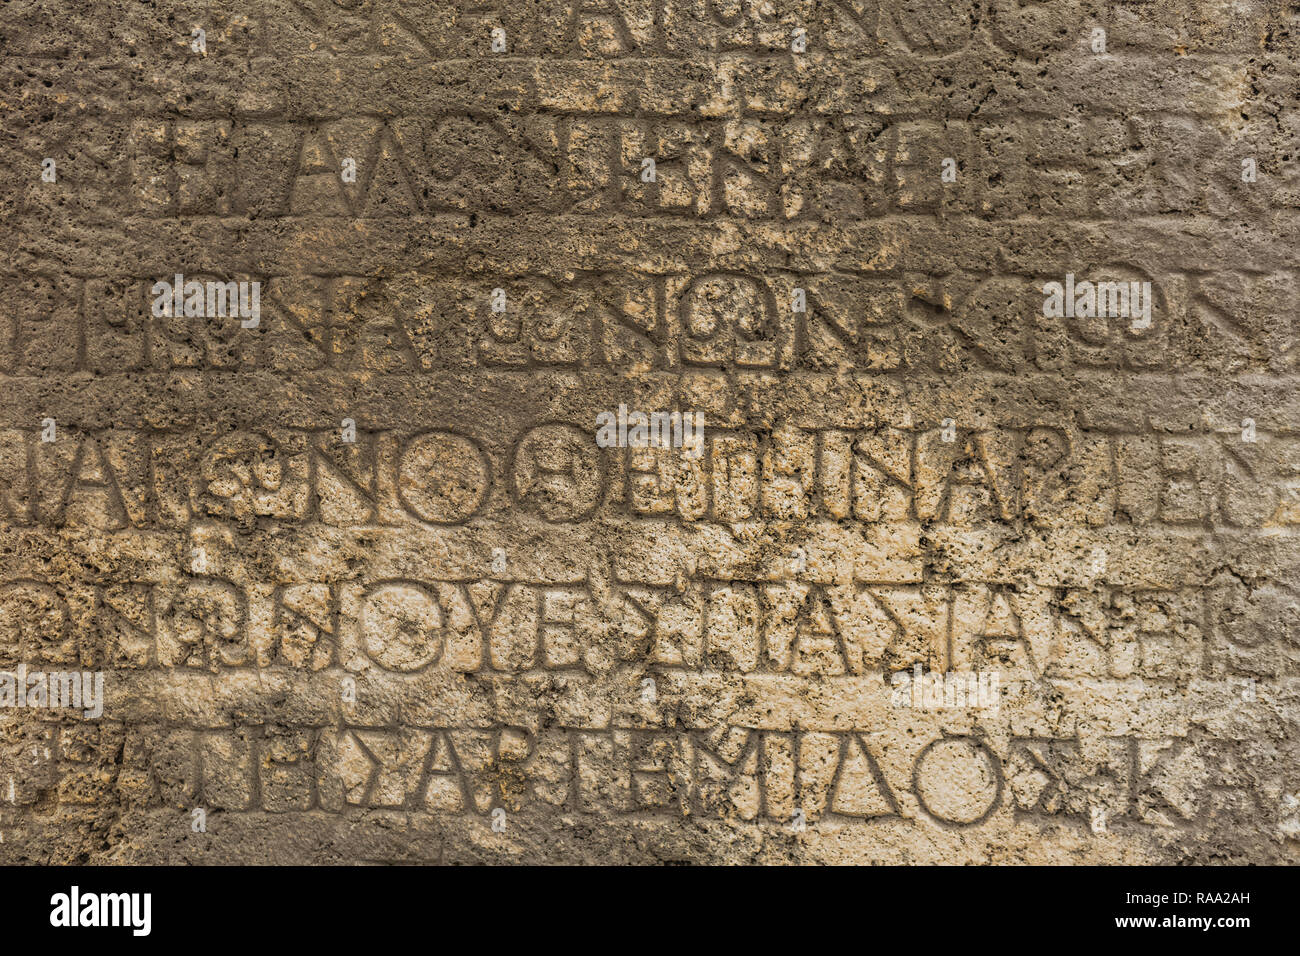 Real ancient letters cutted in stony wall of ancient architecture found during excavations of ancient ruin. Horizontal color photography Stock Photo